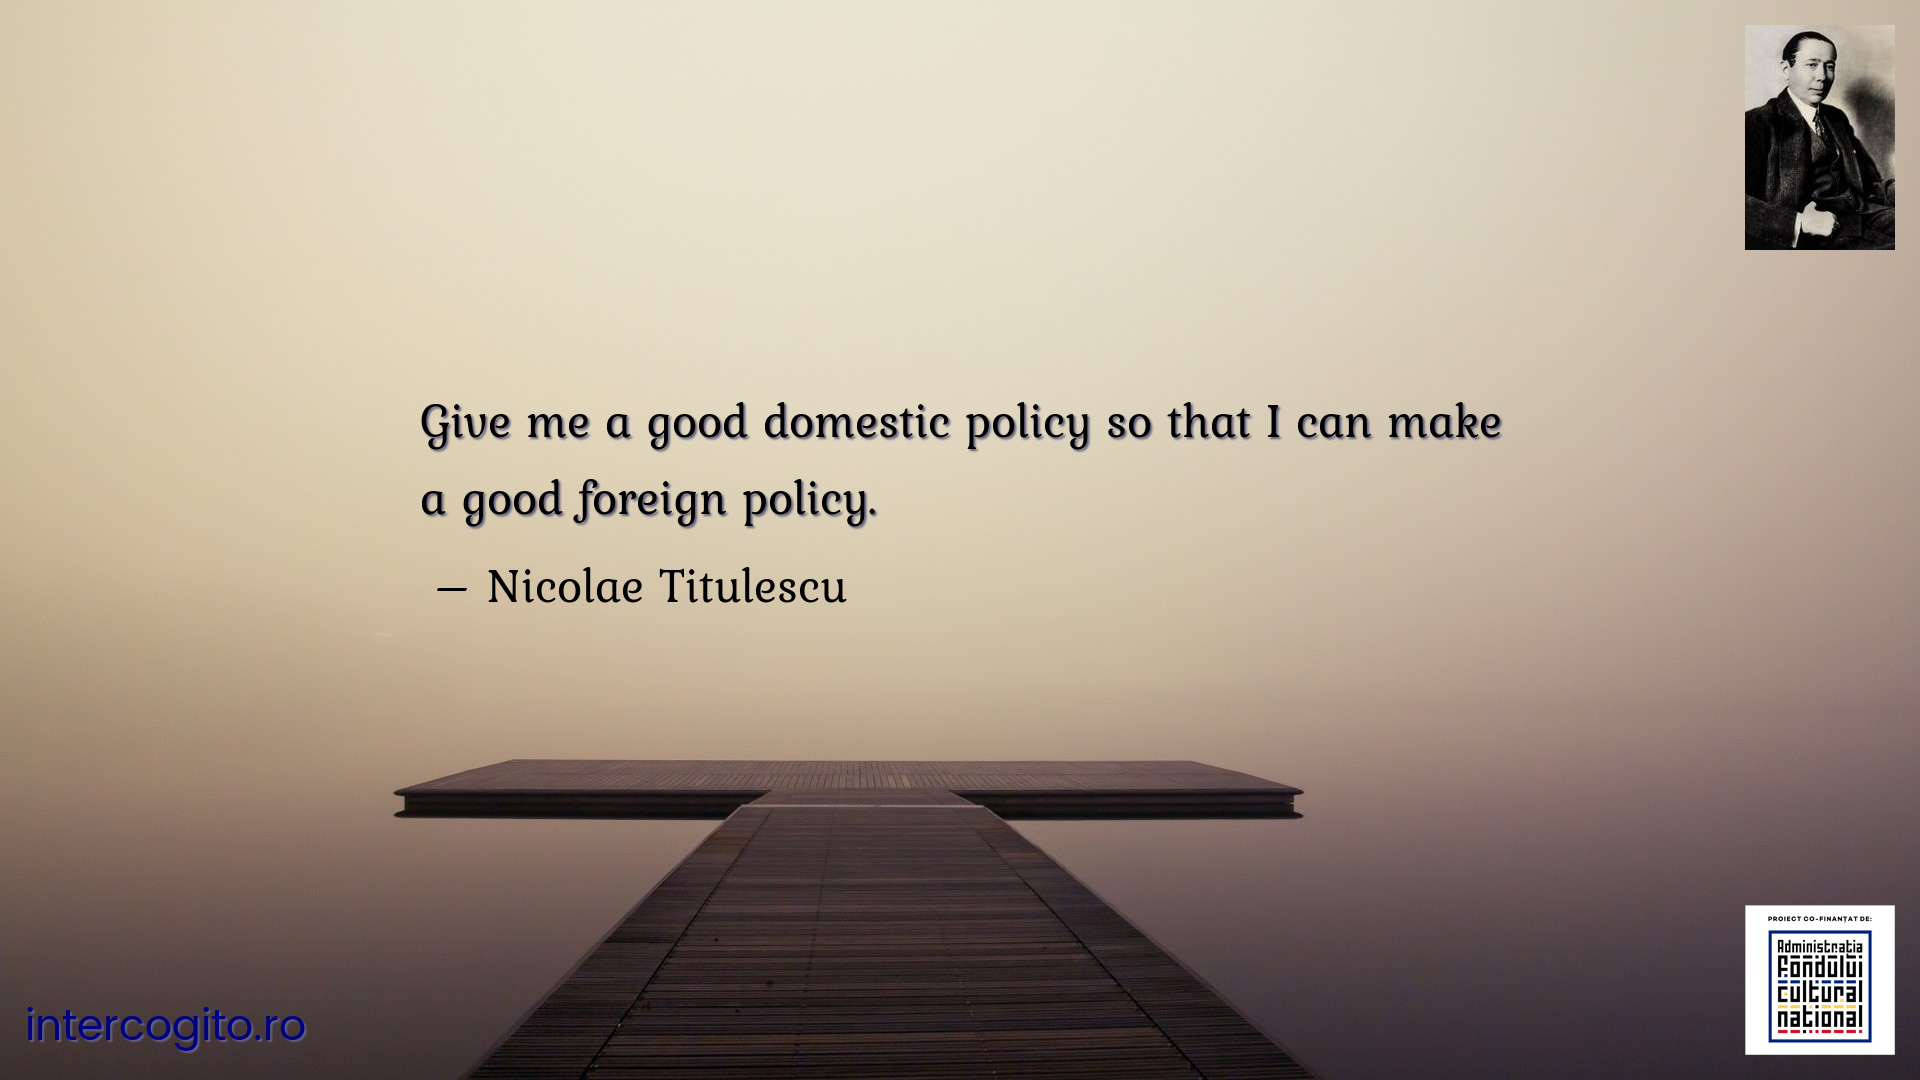 Give me a good domestic policy so that I can make a good foreign policy.